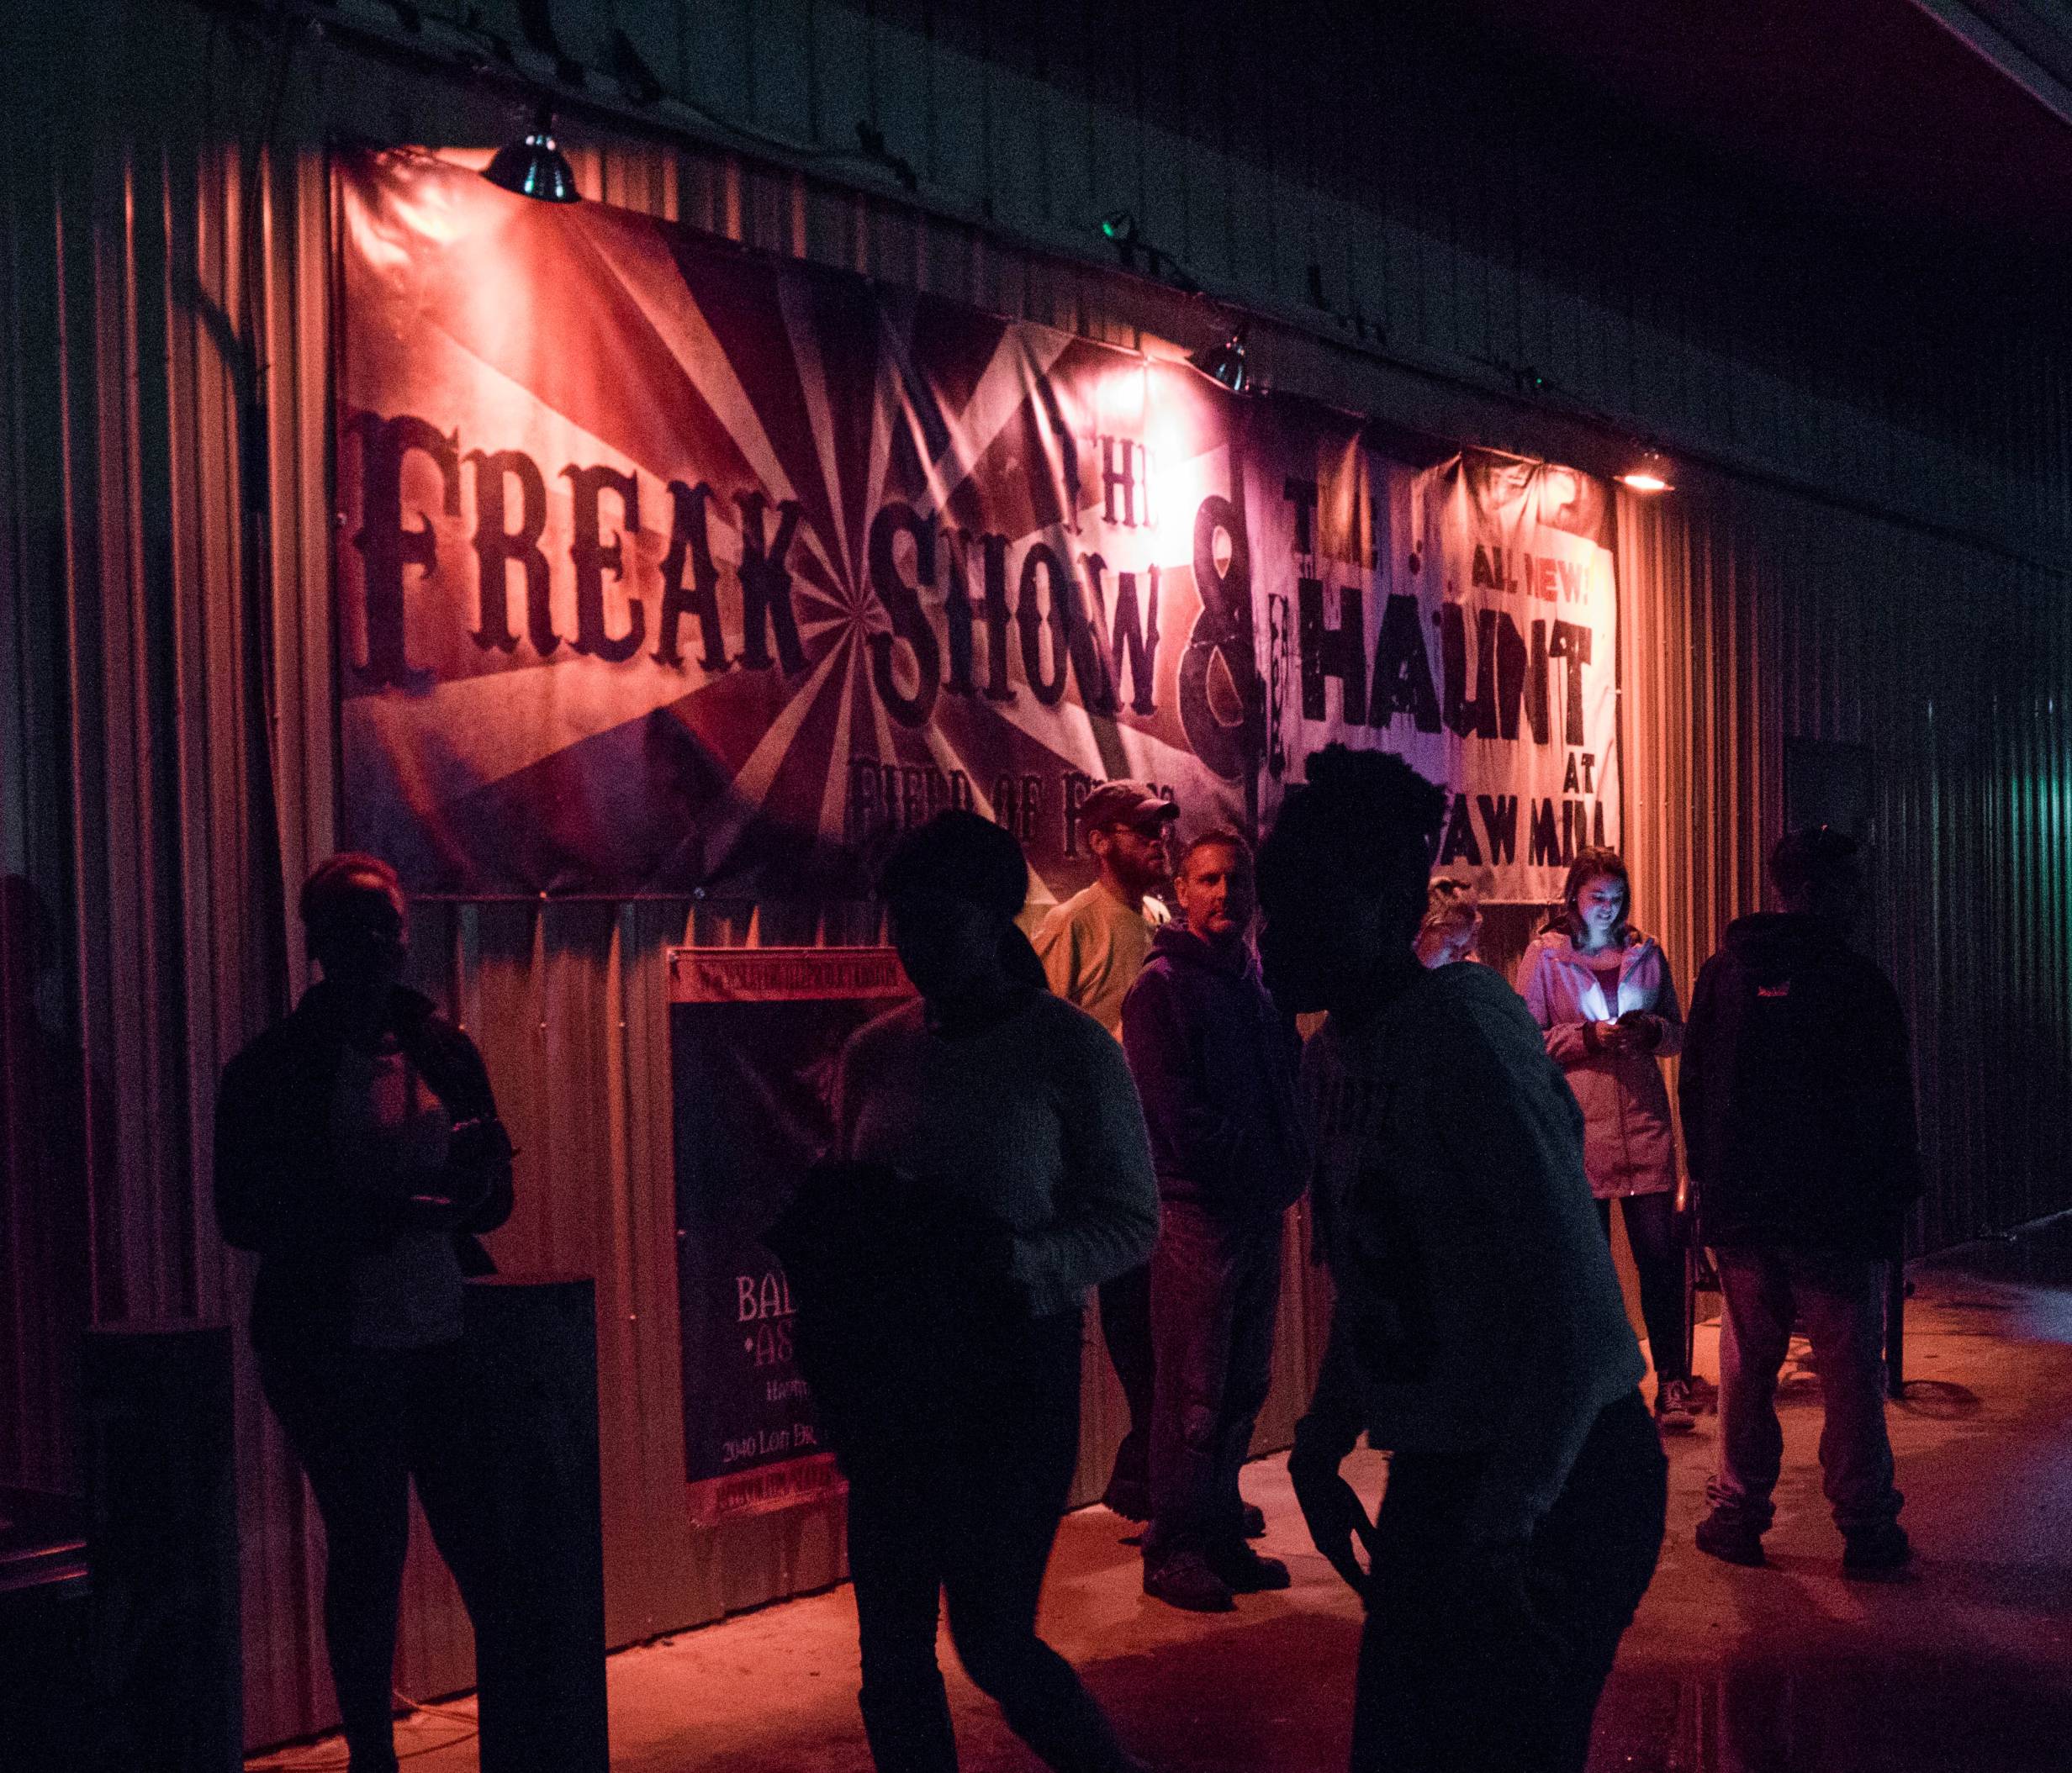 Opening night of the Freak Show & The Haunt at Bonesaw Mill